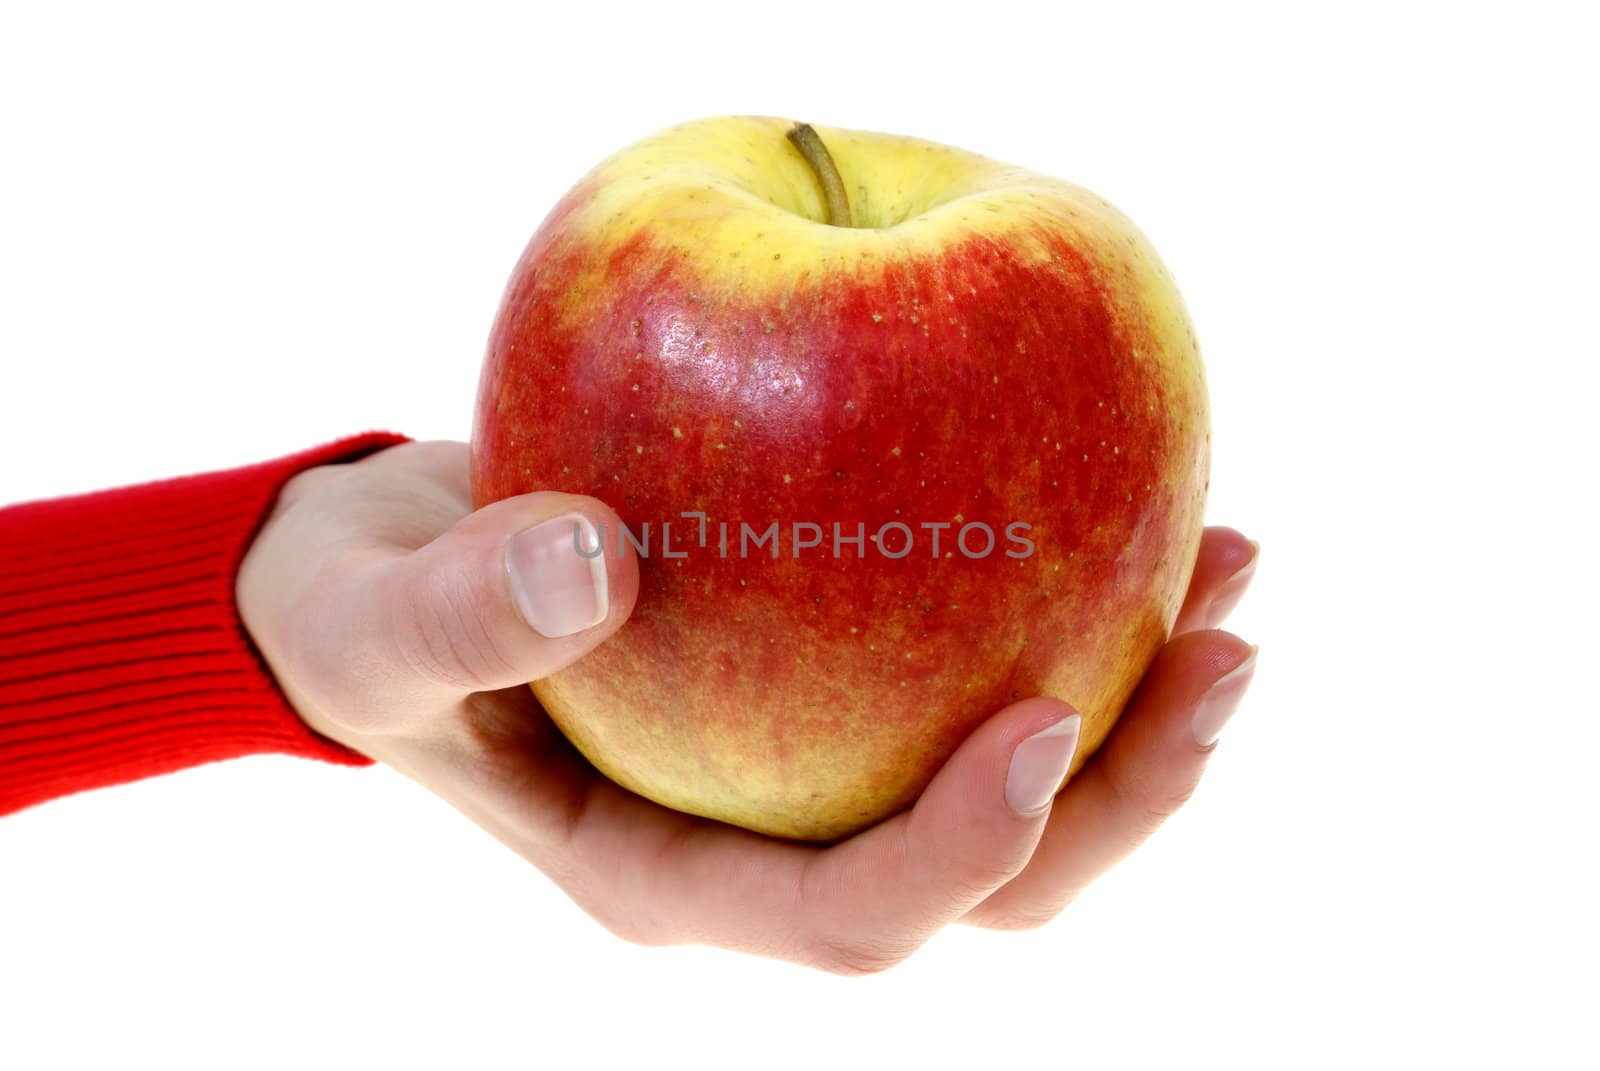 large apple kept in palm isolated on white background
